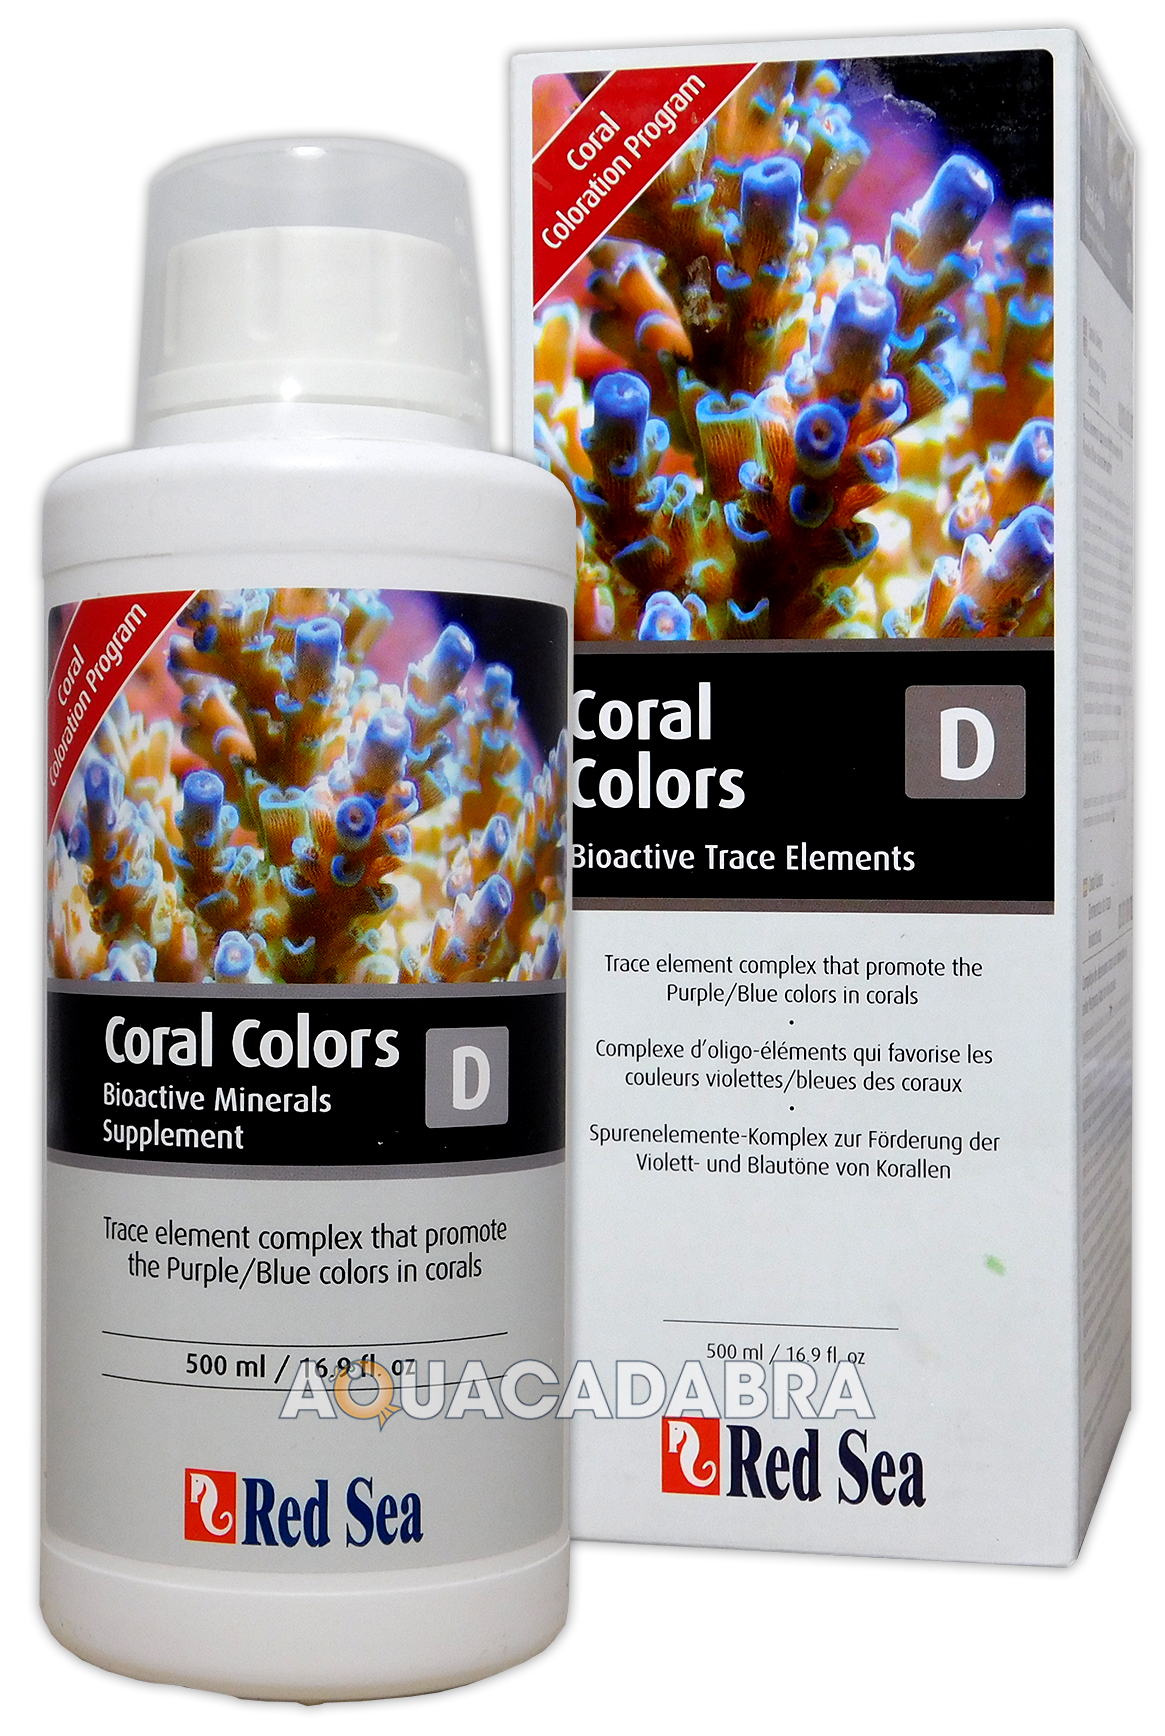 red sea coral colors pro multi test kit